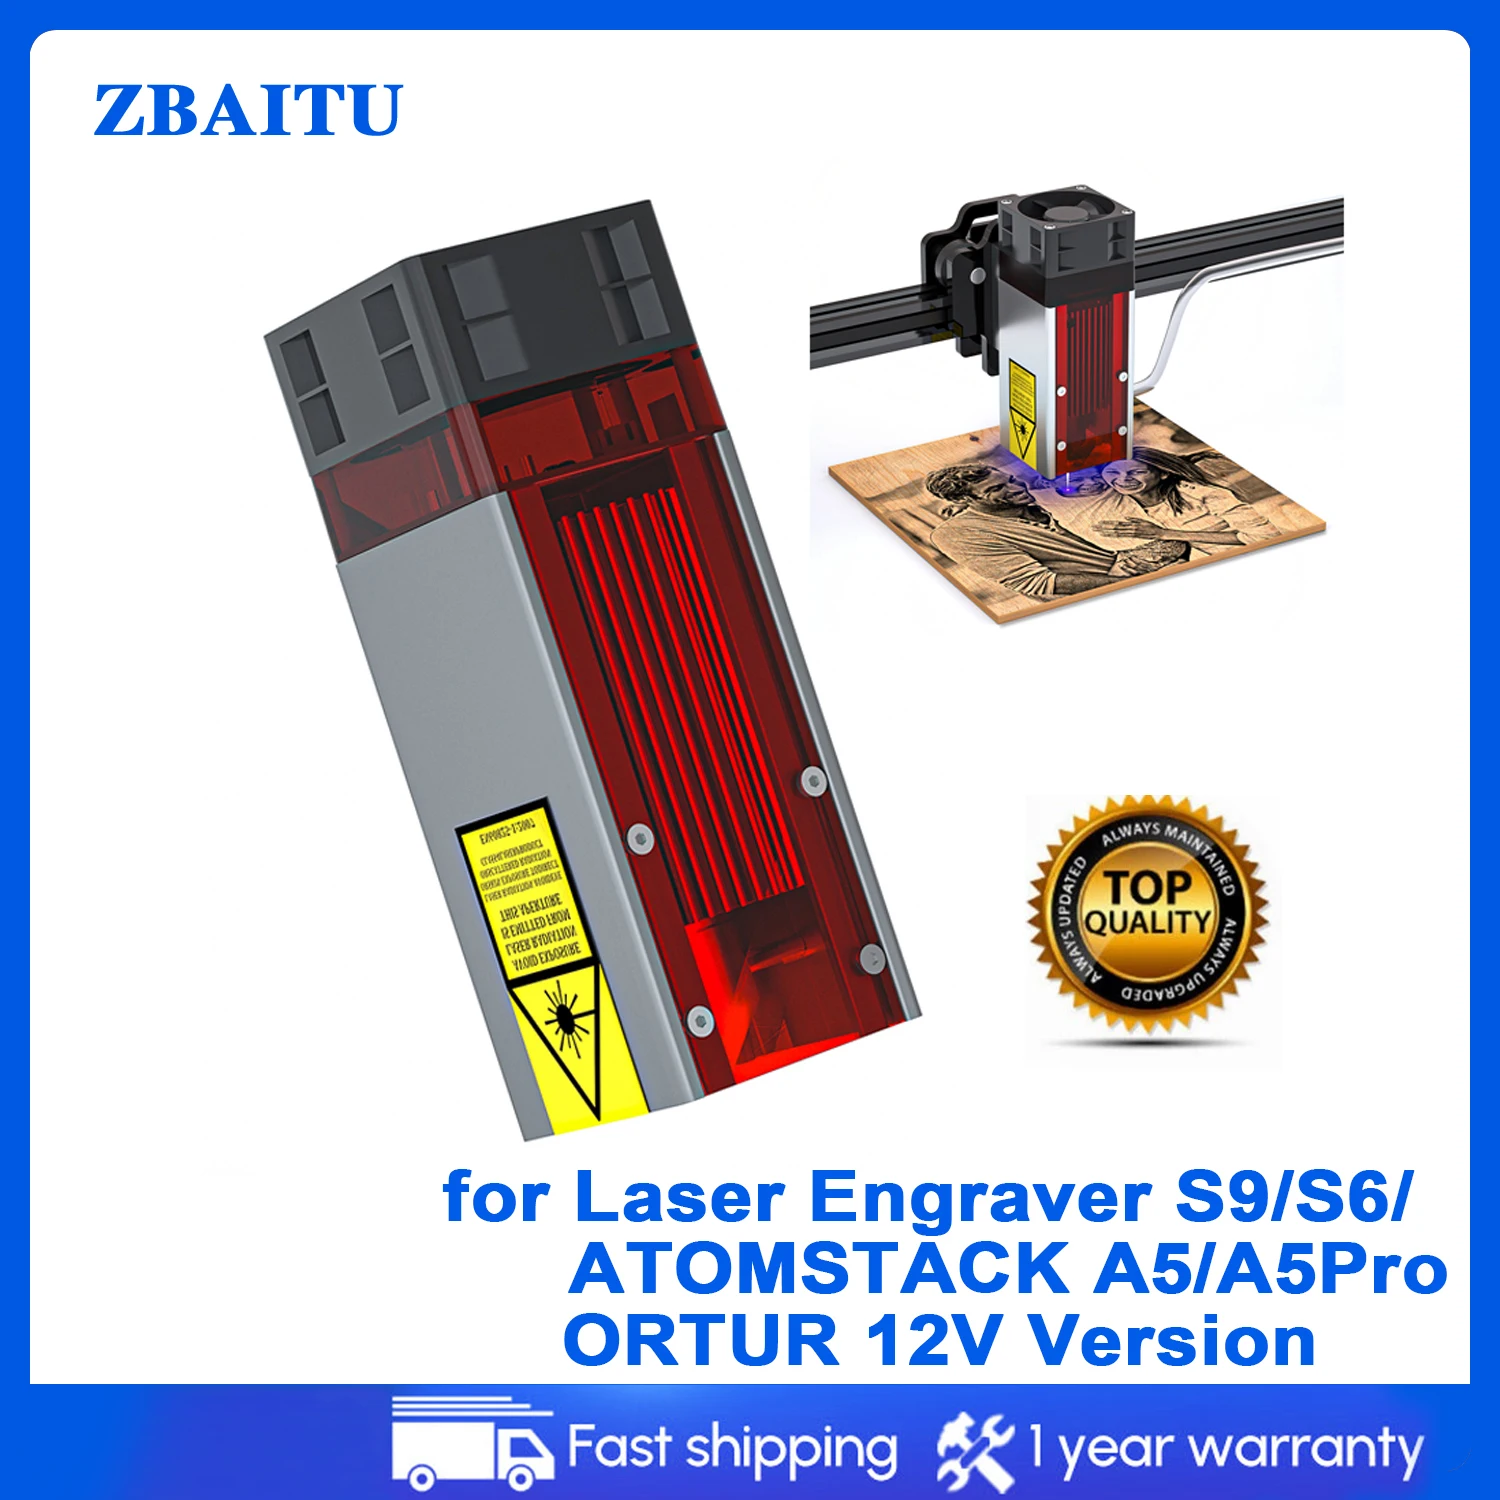 Enlarge ZBAITU 10W Engraving Laser Module Head with Air Assist for Laser Engraver Machine SCULPFUN S9/S6 ATOMSTACK A5/A5Pro ORTUR 12V